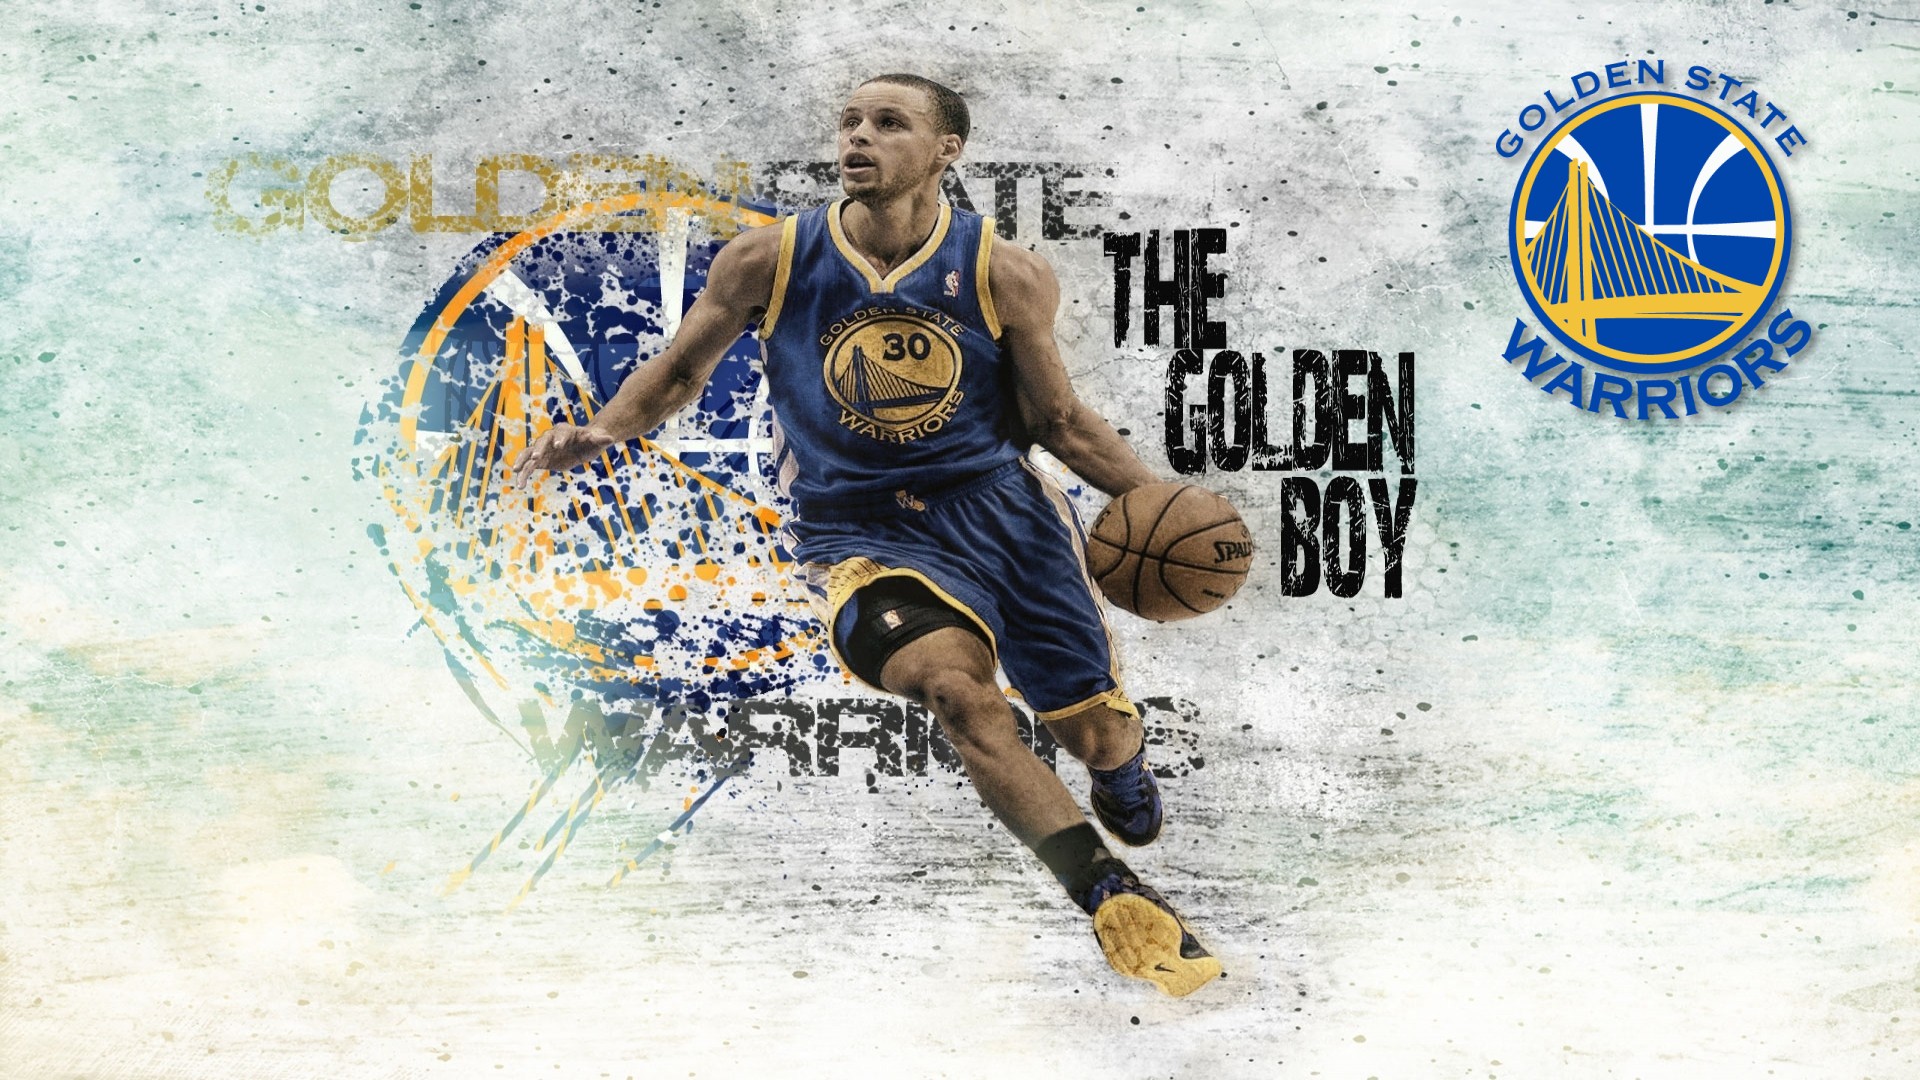 Wallpapers HD Stephen Curry with image dimensions 1920x1080 pixel. You can make this wallpaper for your Desktop Computer Backgrounds, Windows or Mac Screensavers, iPhone Lock screen, Tablet or Android and another Mobile Phone device